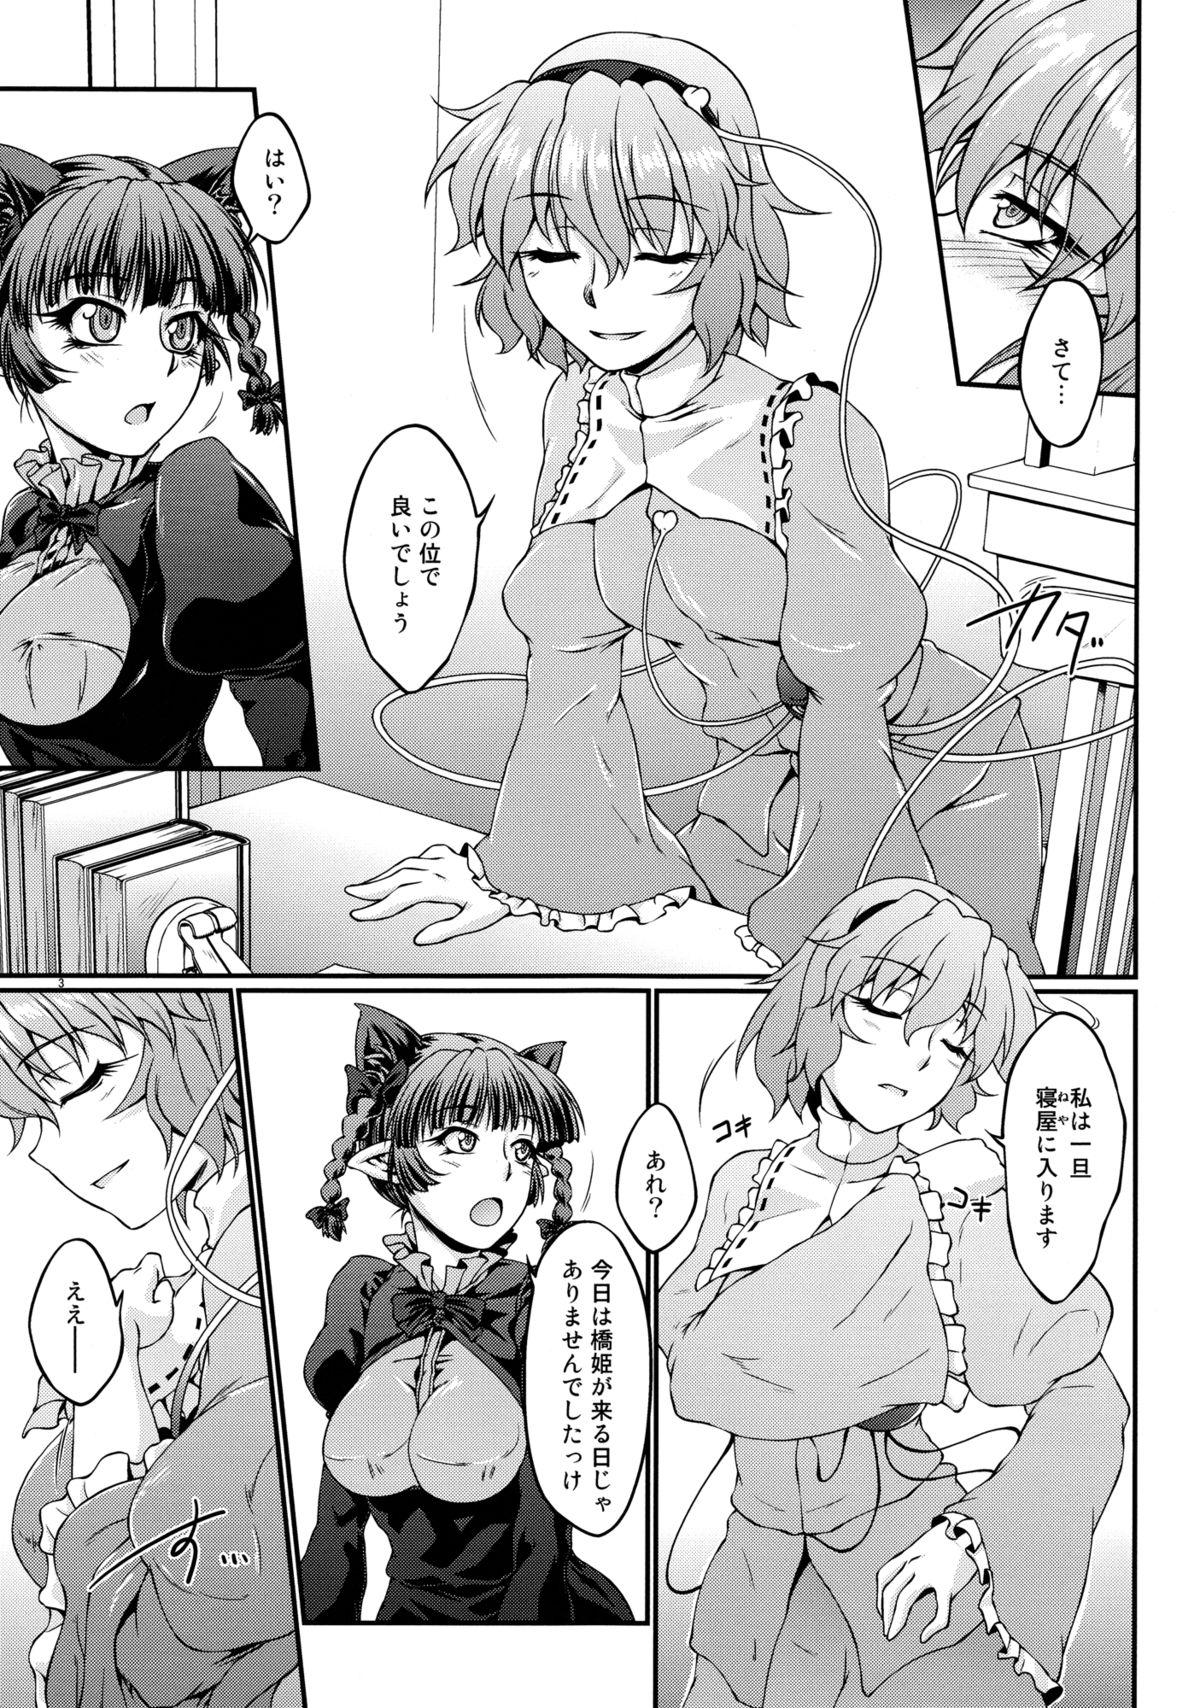 Stripping Sleeping? - Touhou project Tranny - Page 2